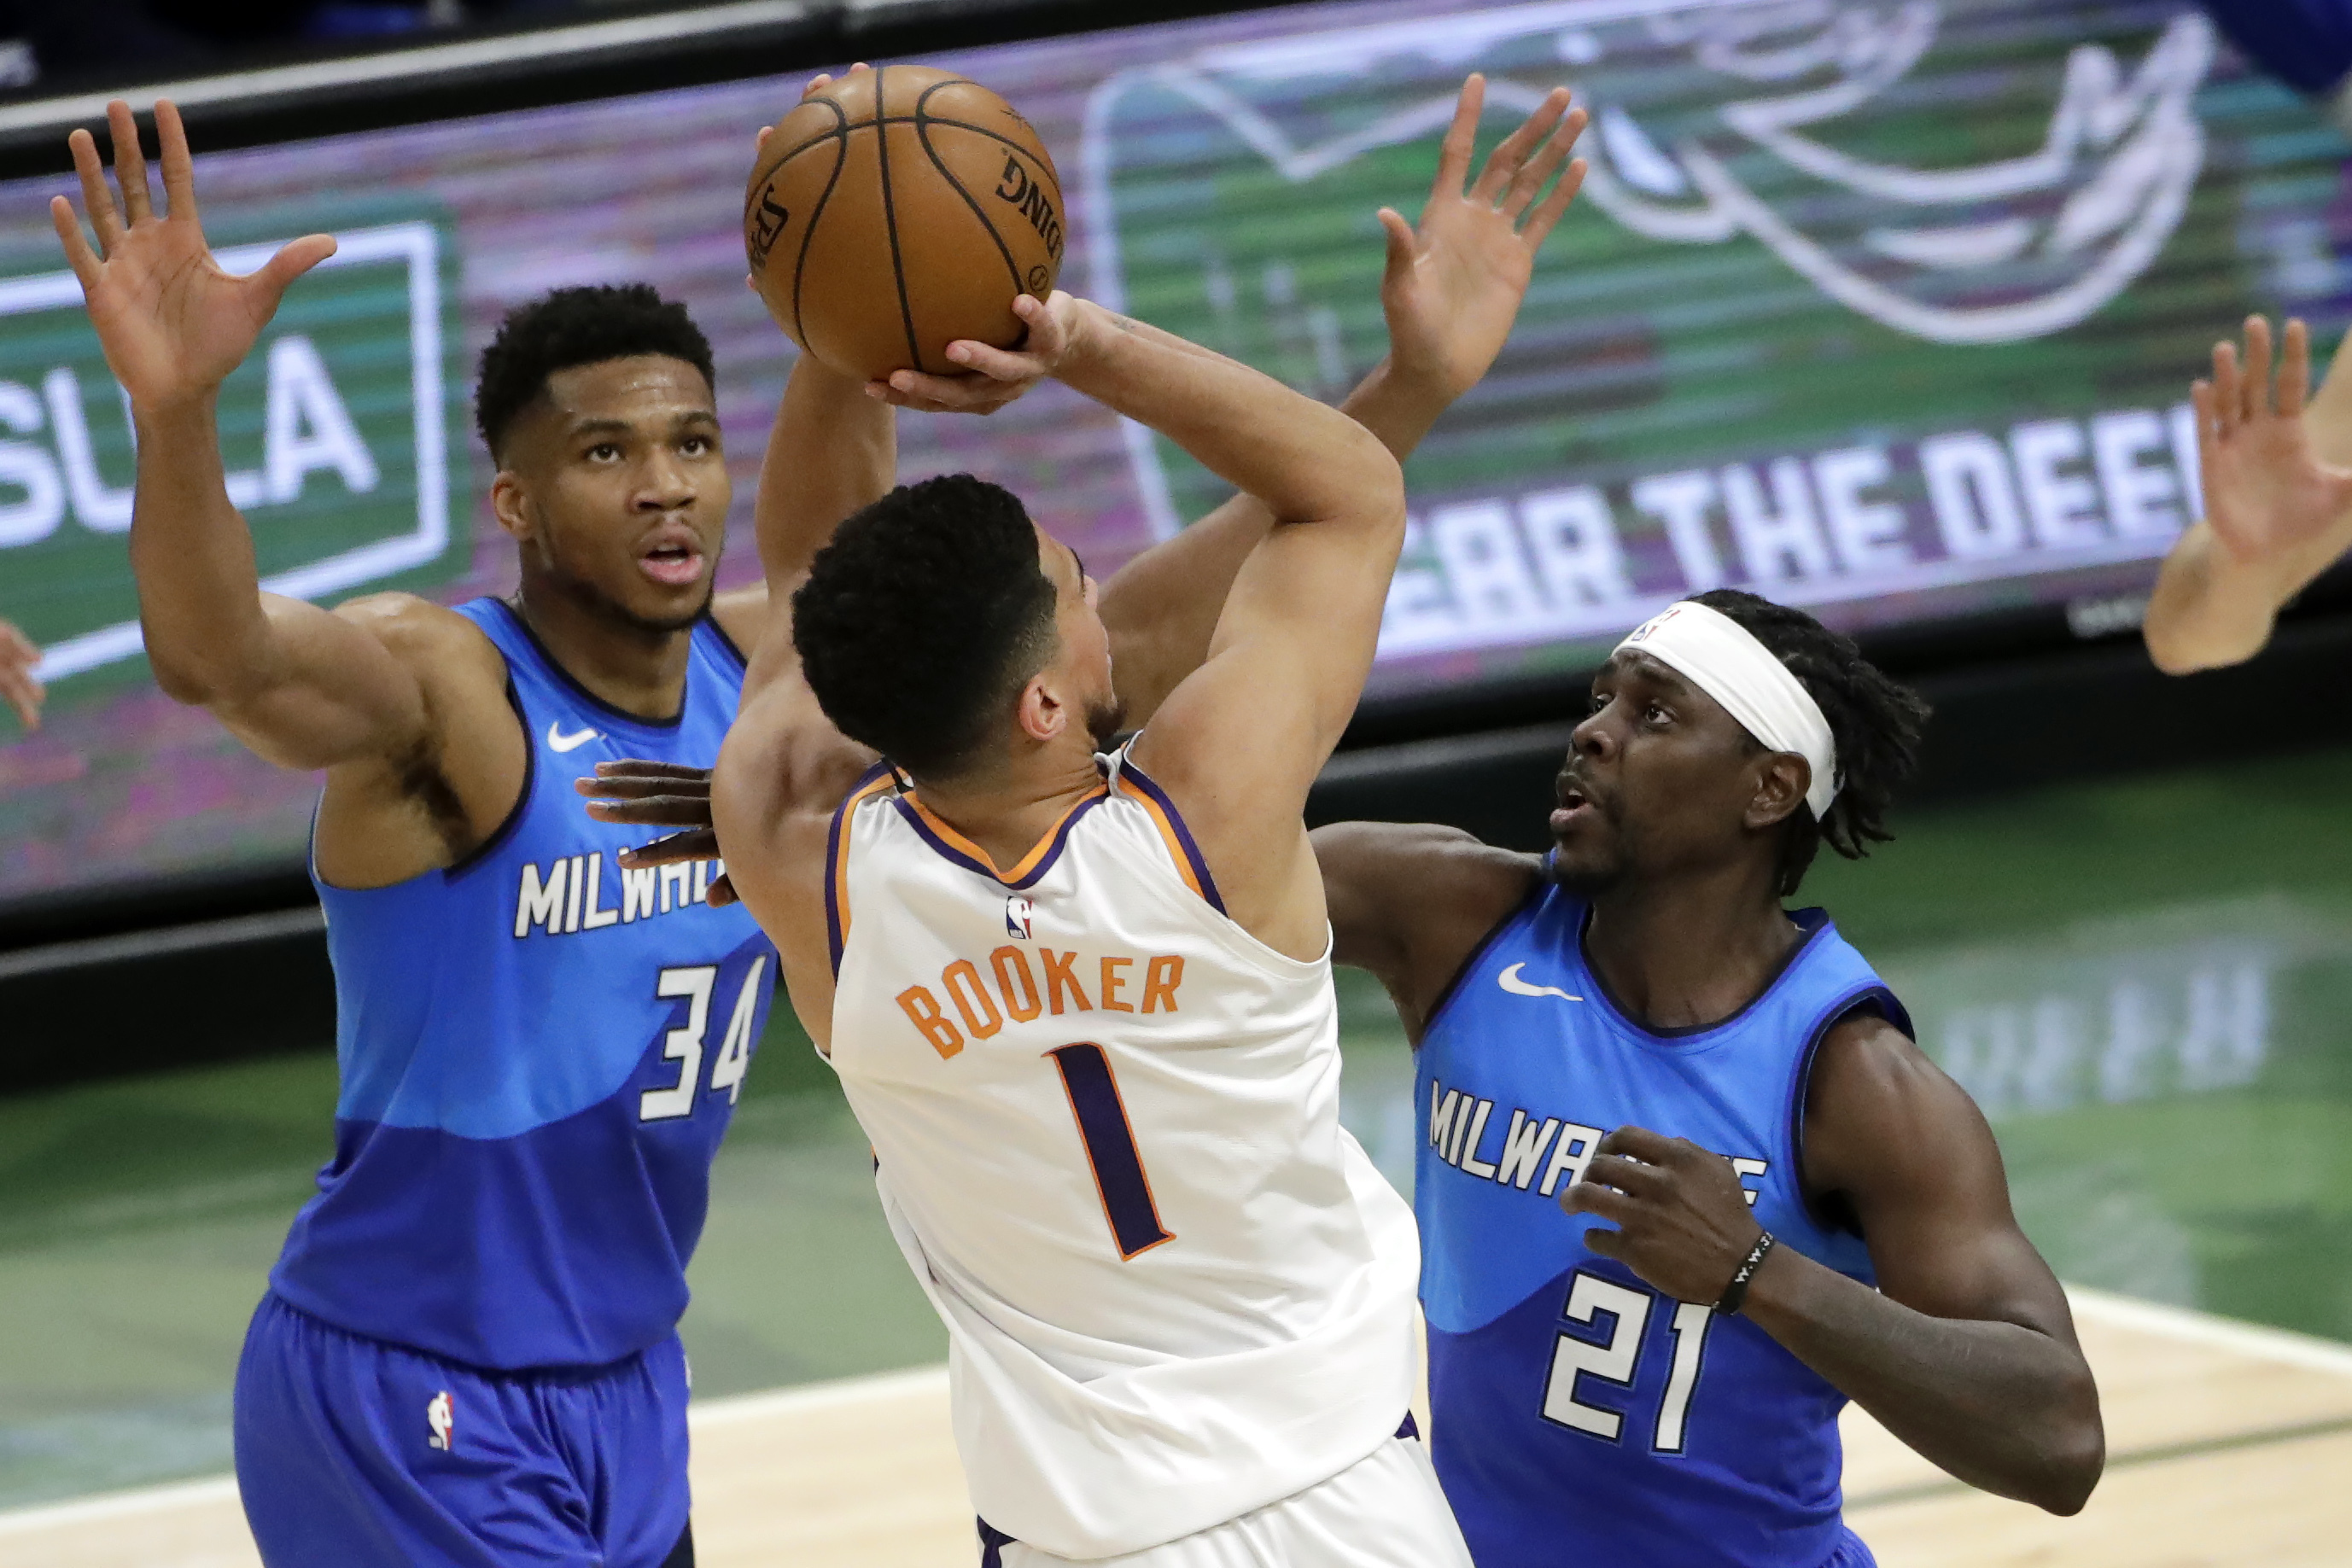 Phoenix Suns commentary: Devin Booker can use All-Star snub as fuel